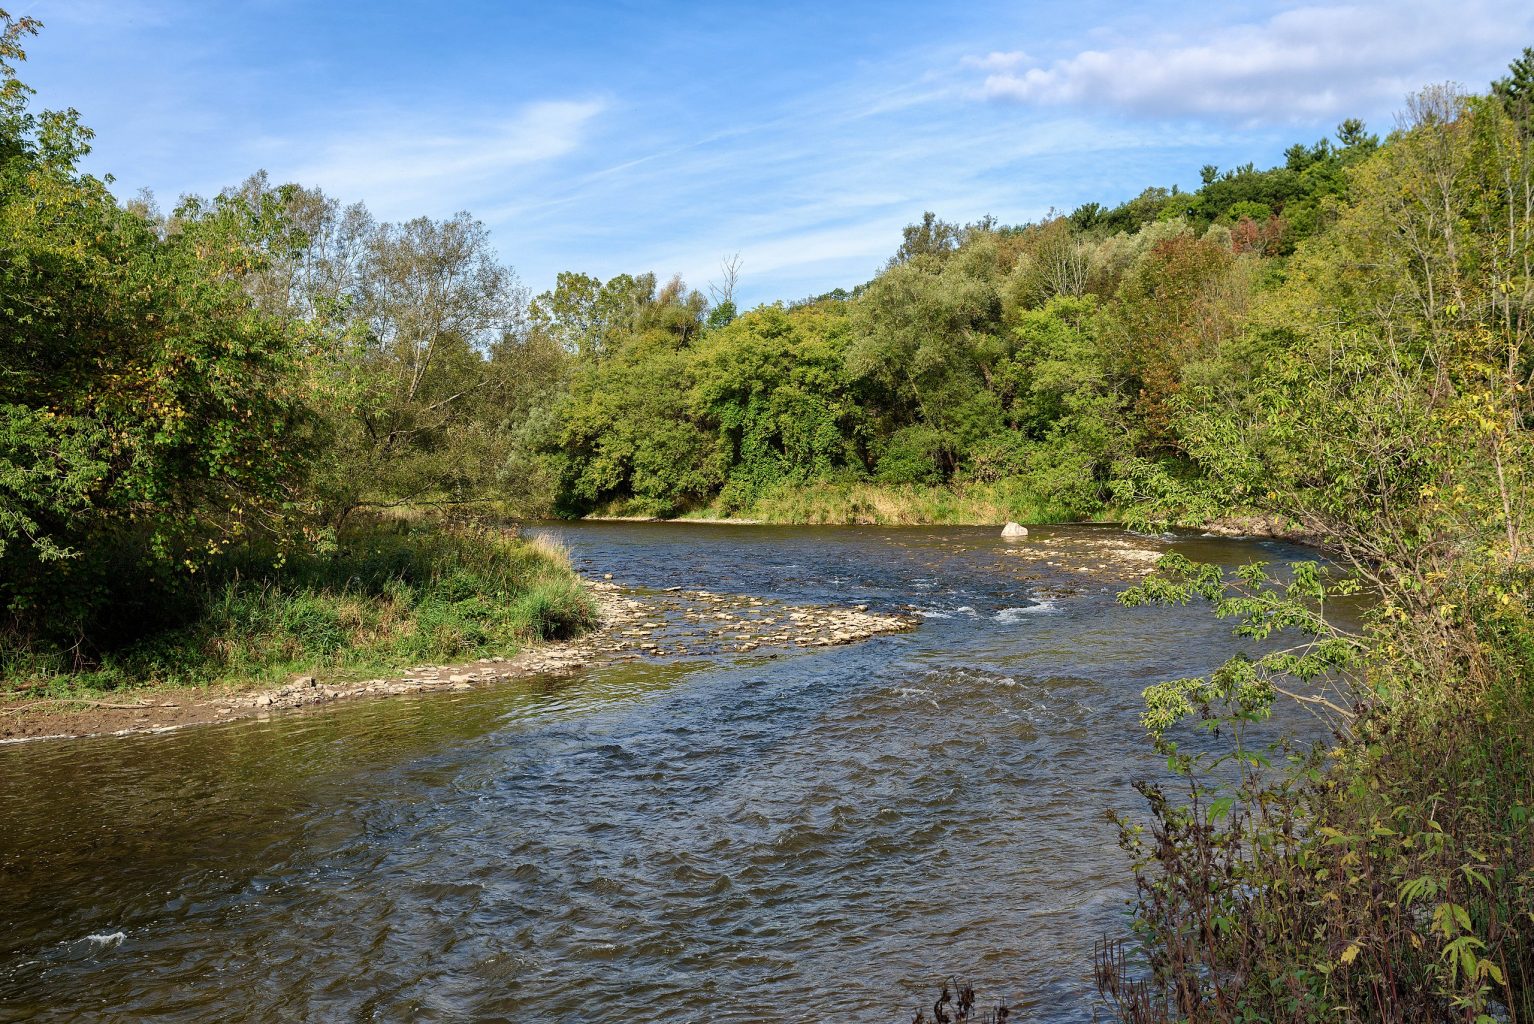 Photograph of a curve in the Credit River, Mississauga, Ontario. There are green trees in the midground and a bright blue sky in the background.